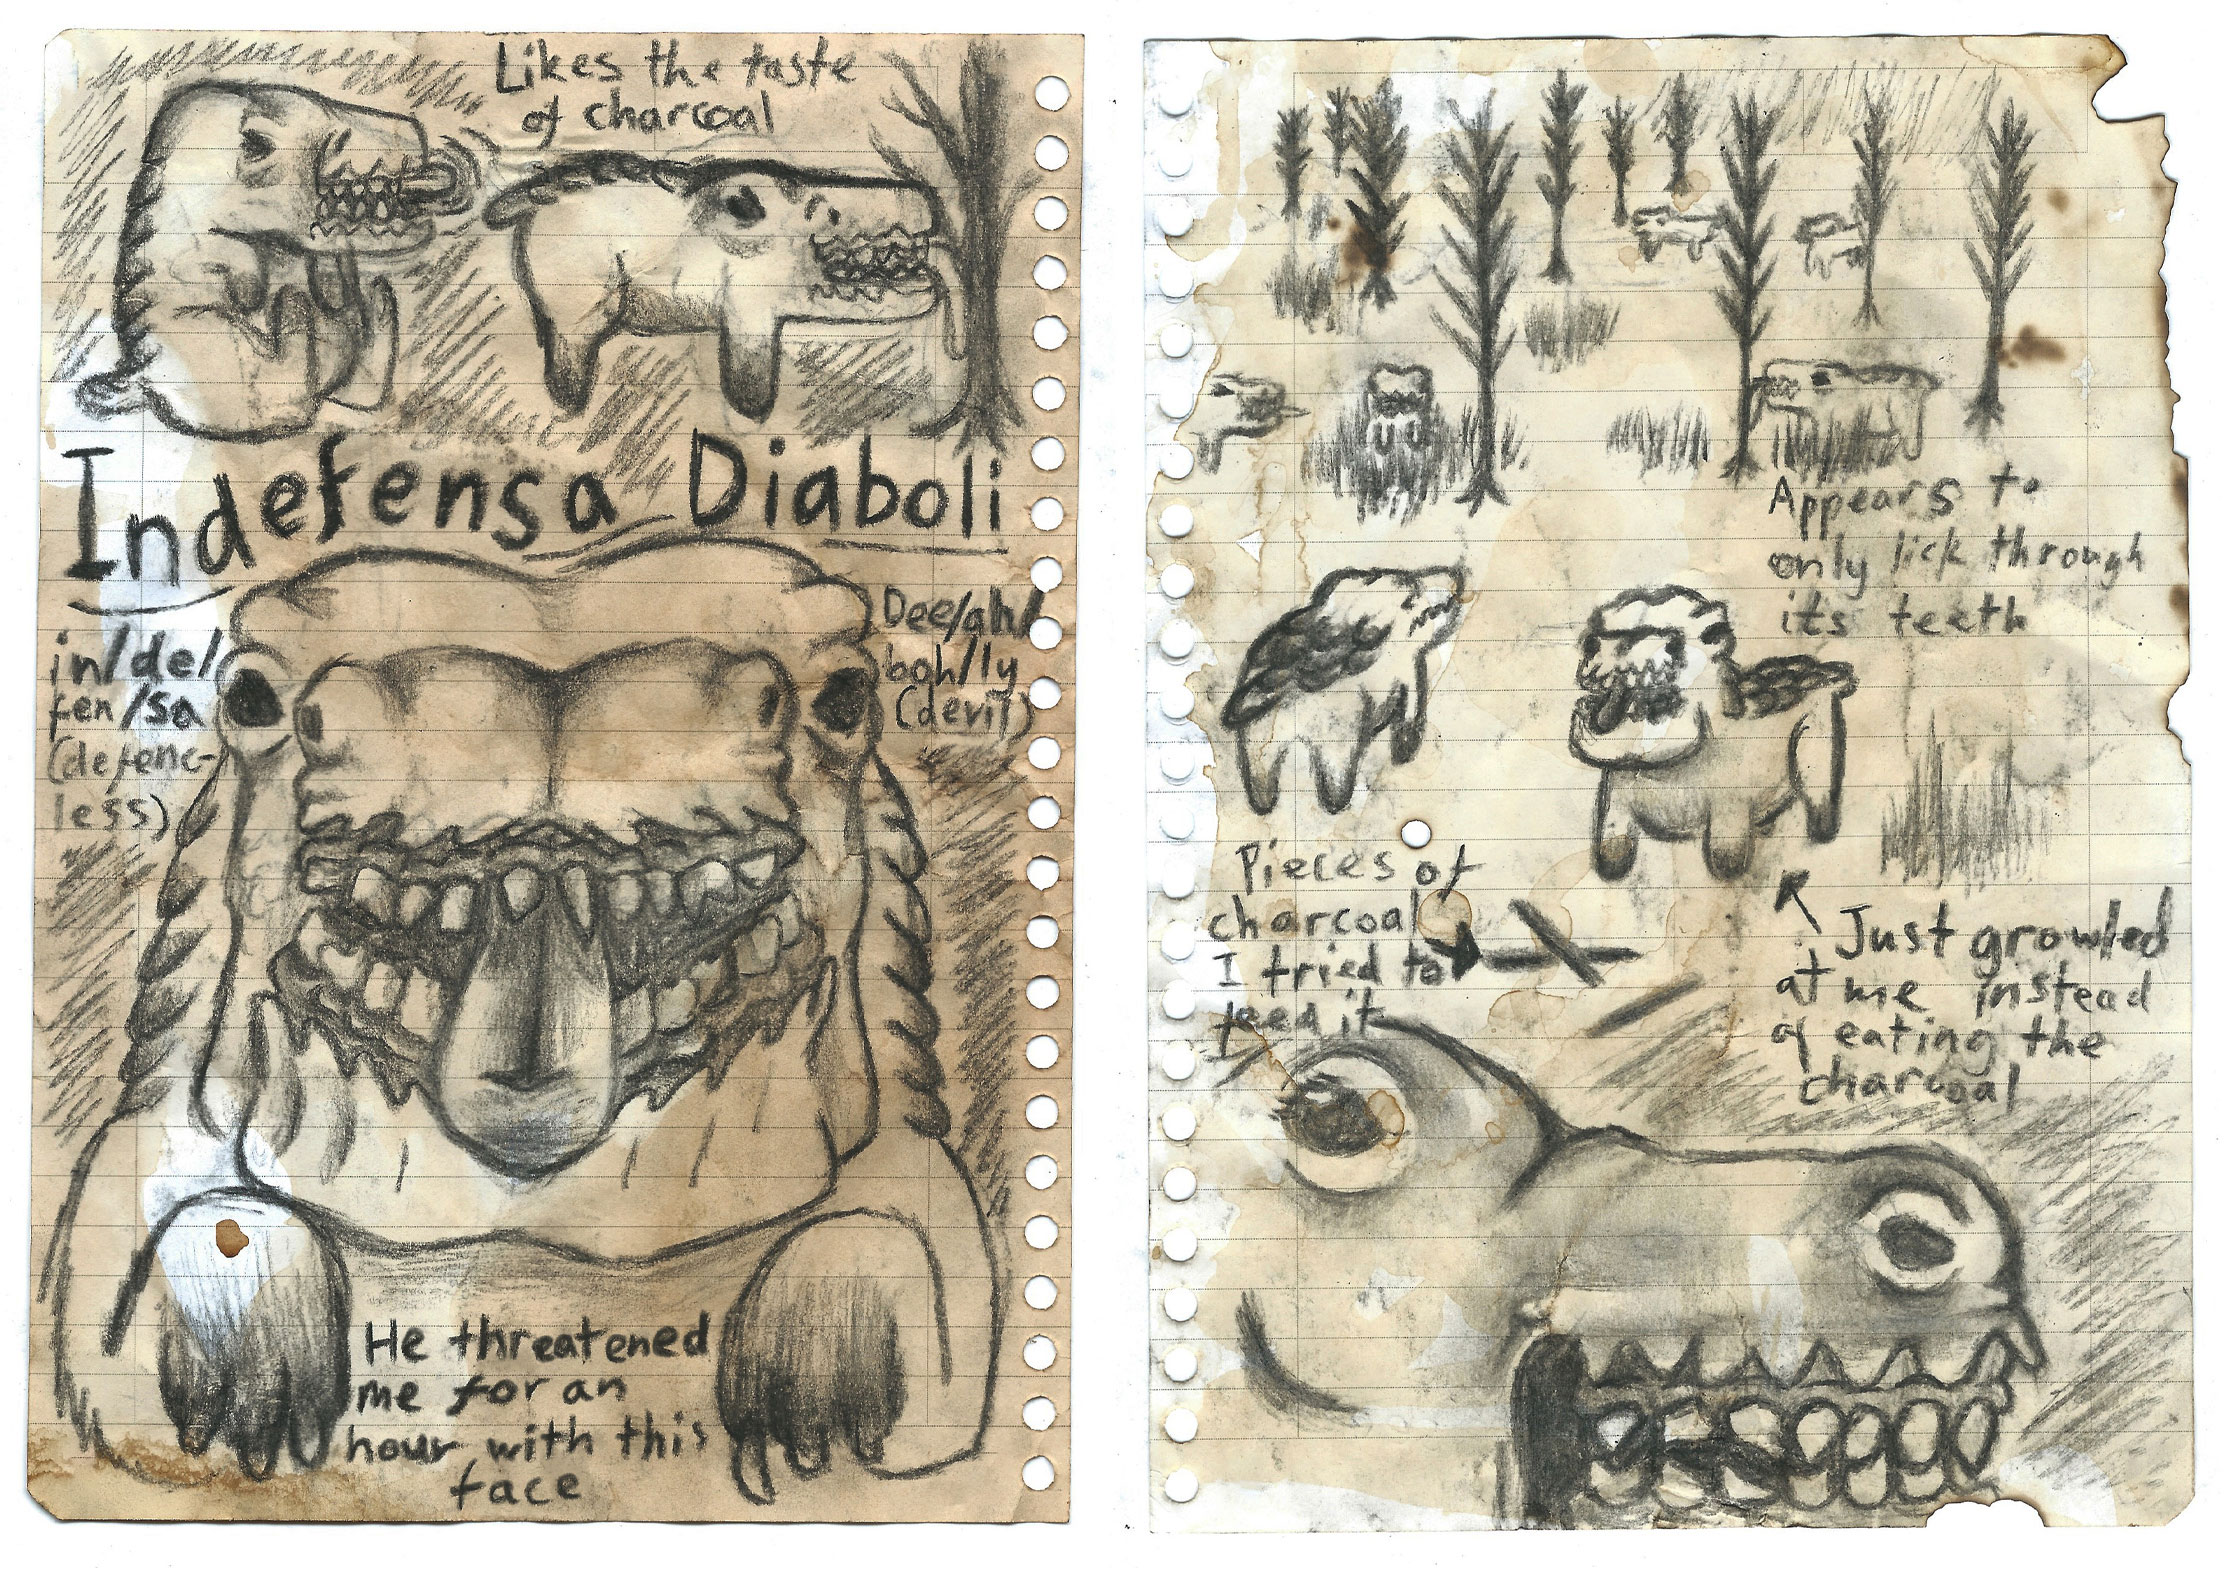 Sketchbook pages of charcoal drawings of beasts, Indefensa Diaboli